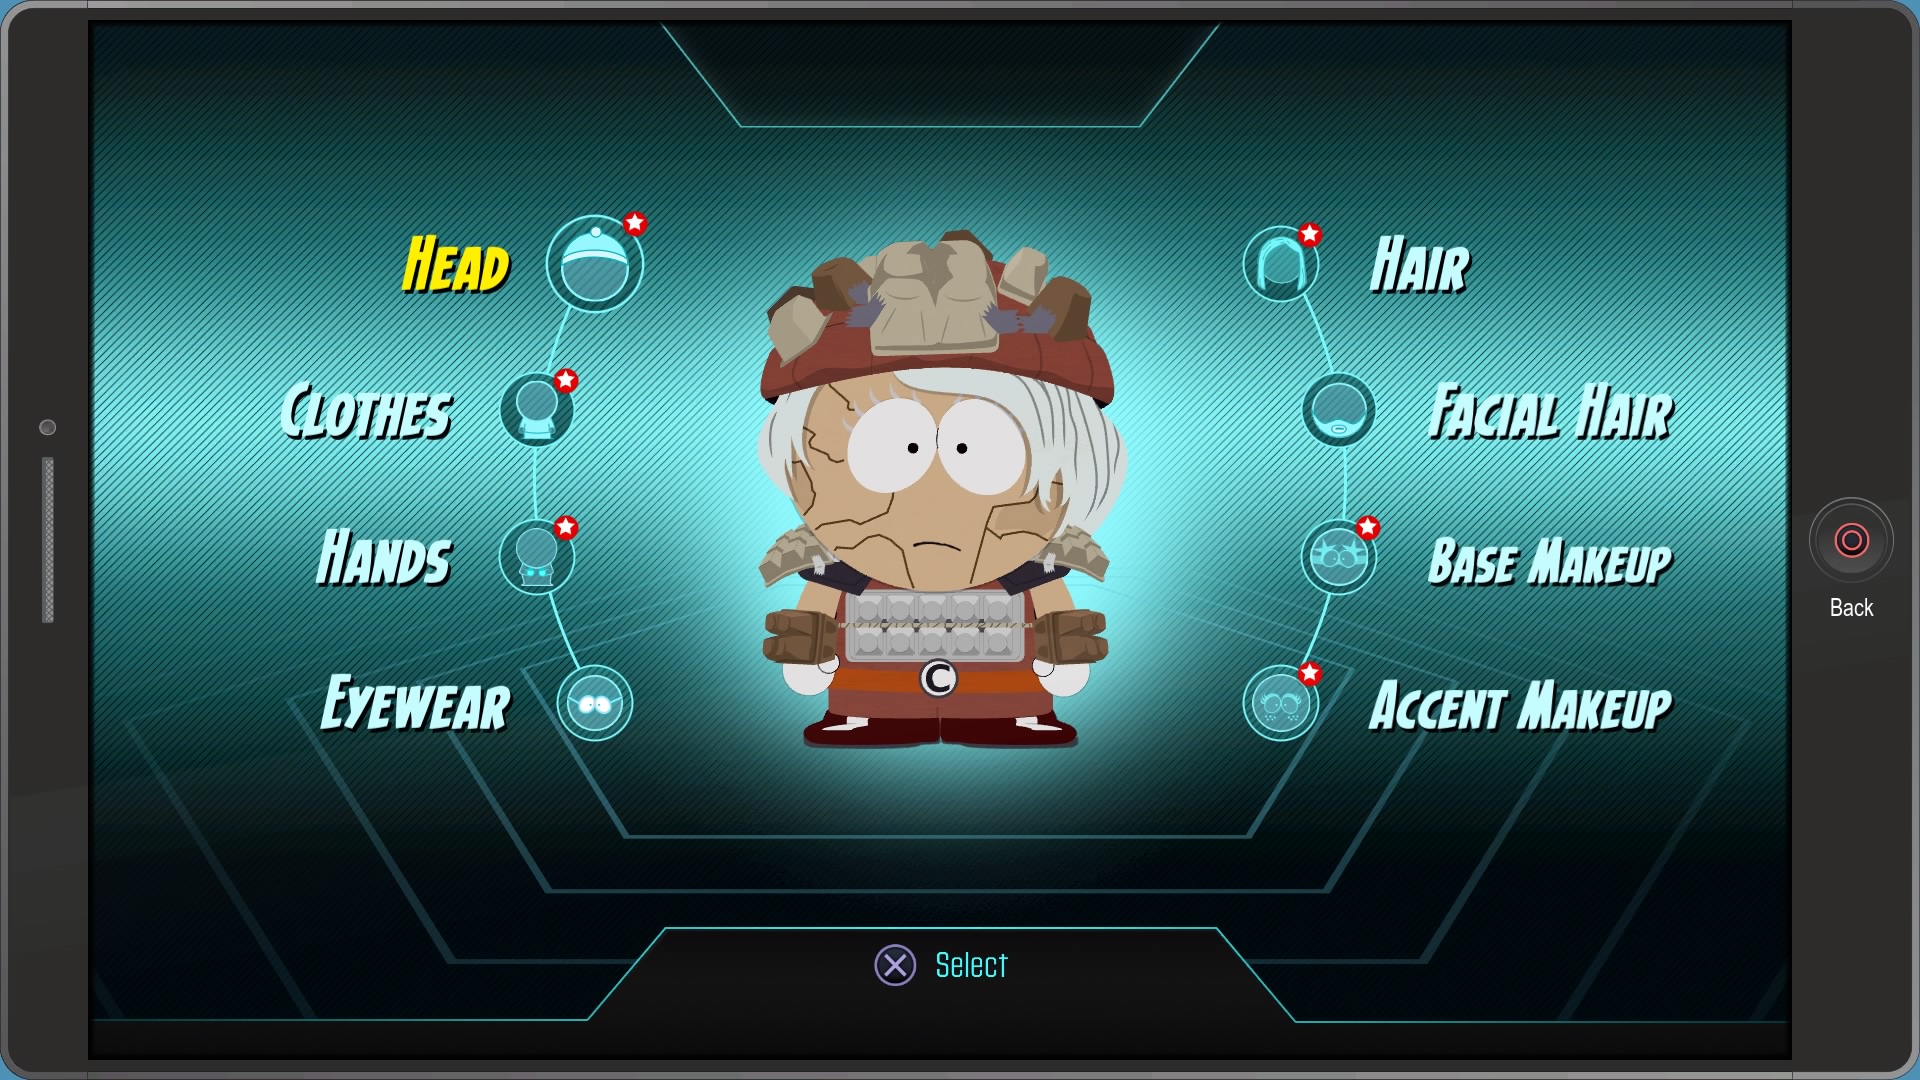 south park the fractured but whole pc controller stops working in combat